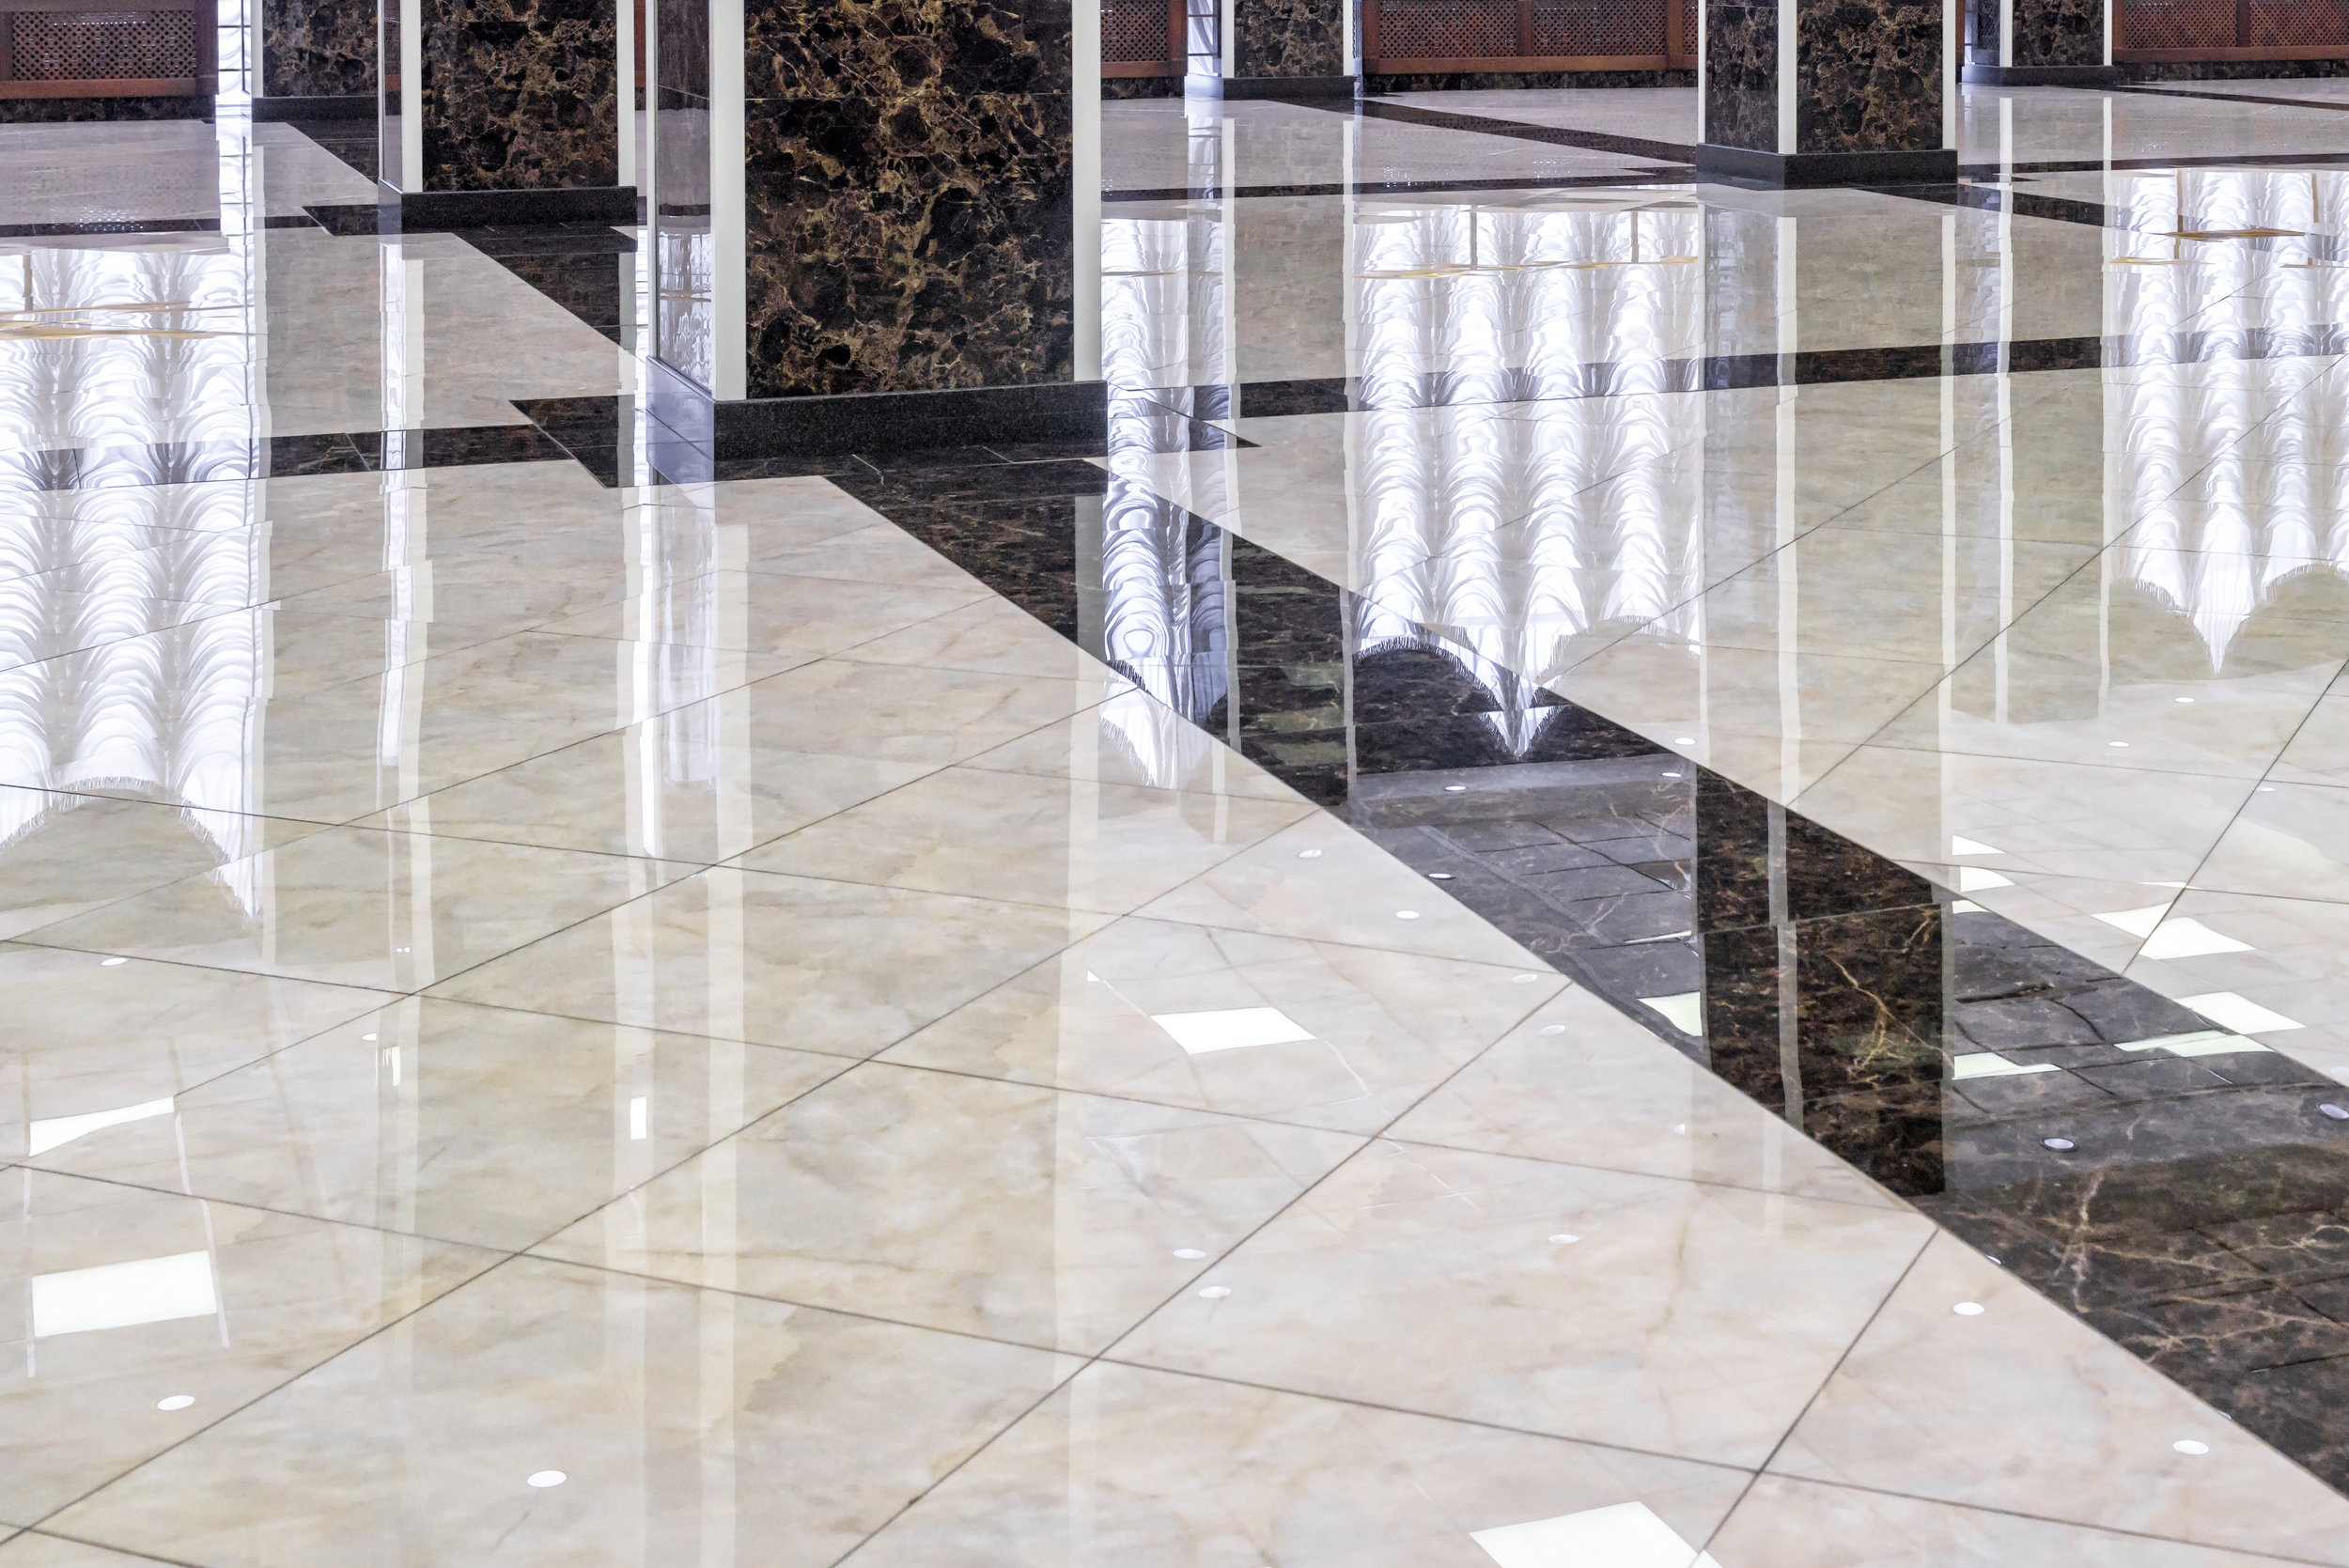 Marble floor in the luxury lobby of office or hotel